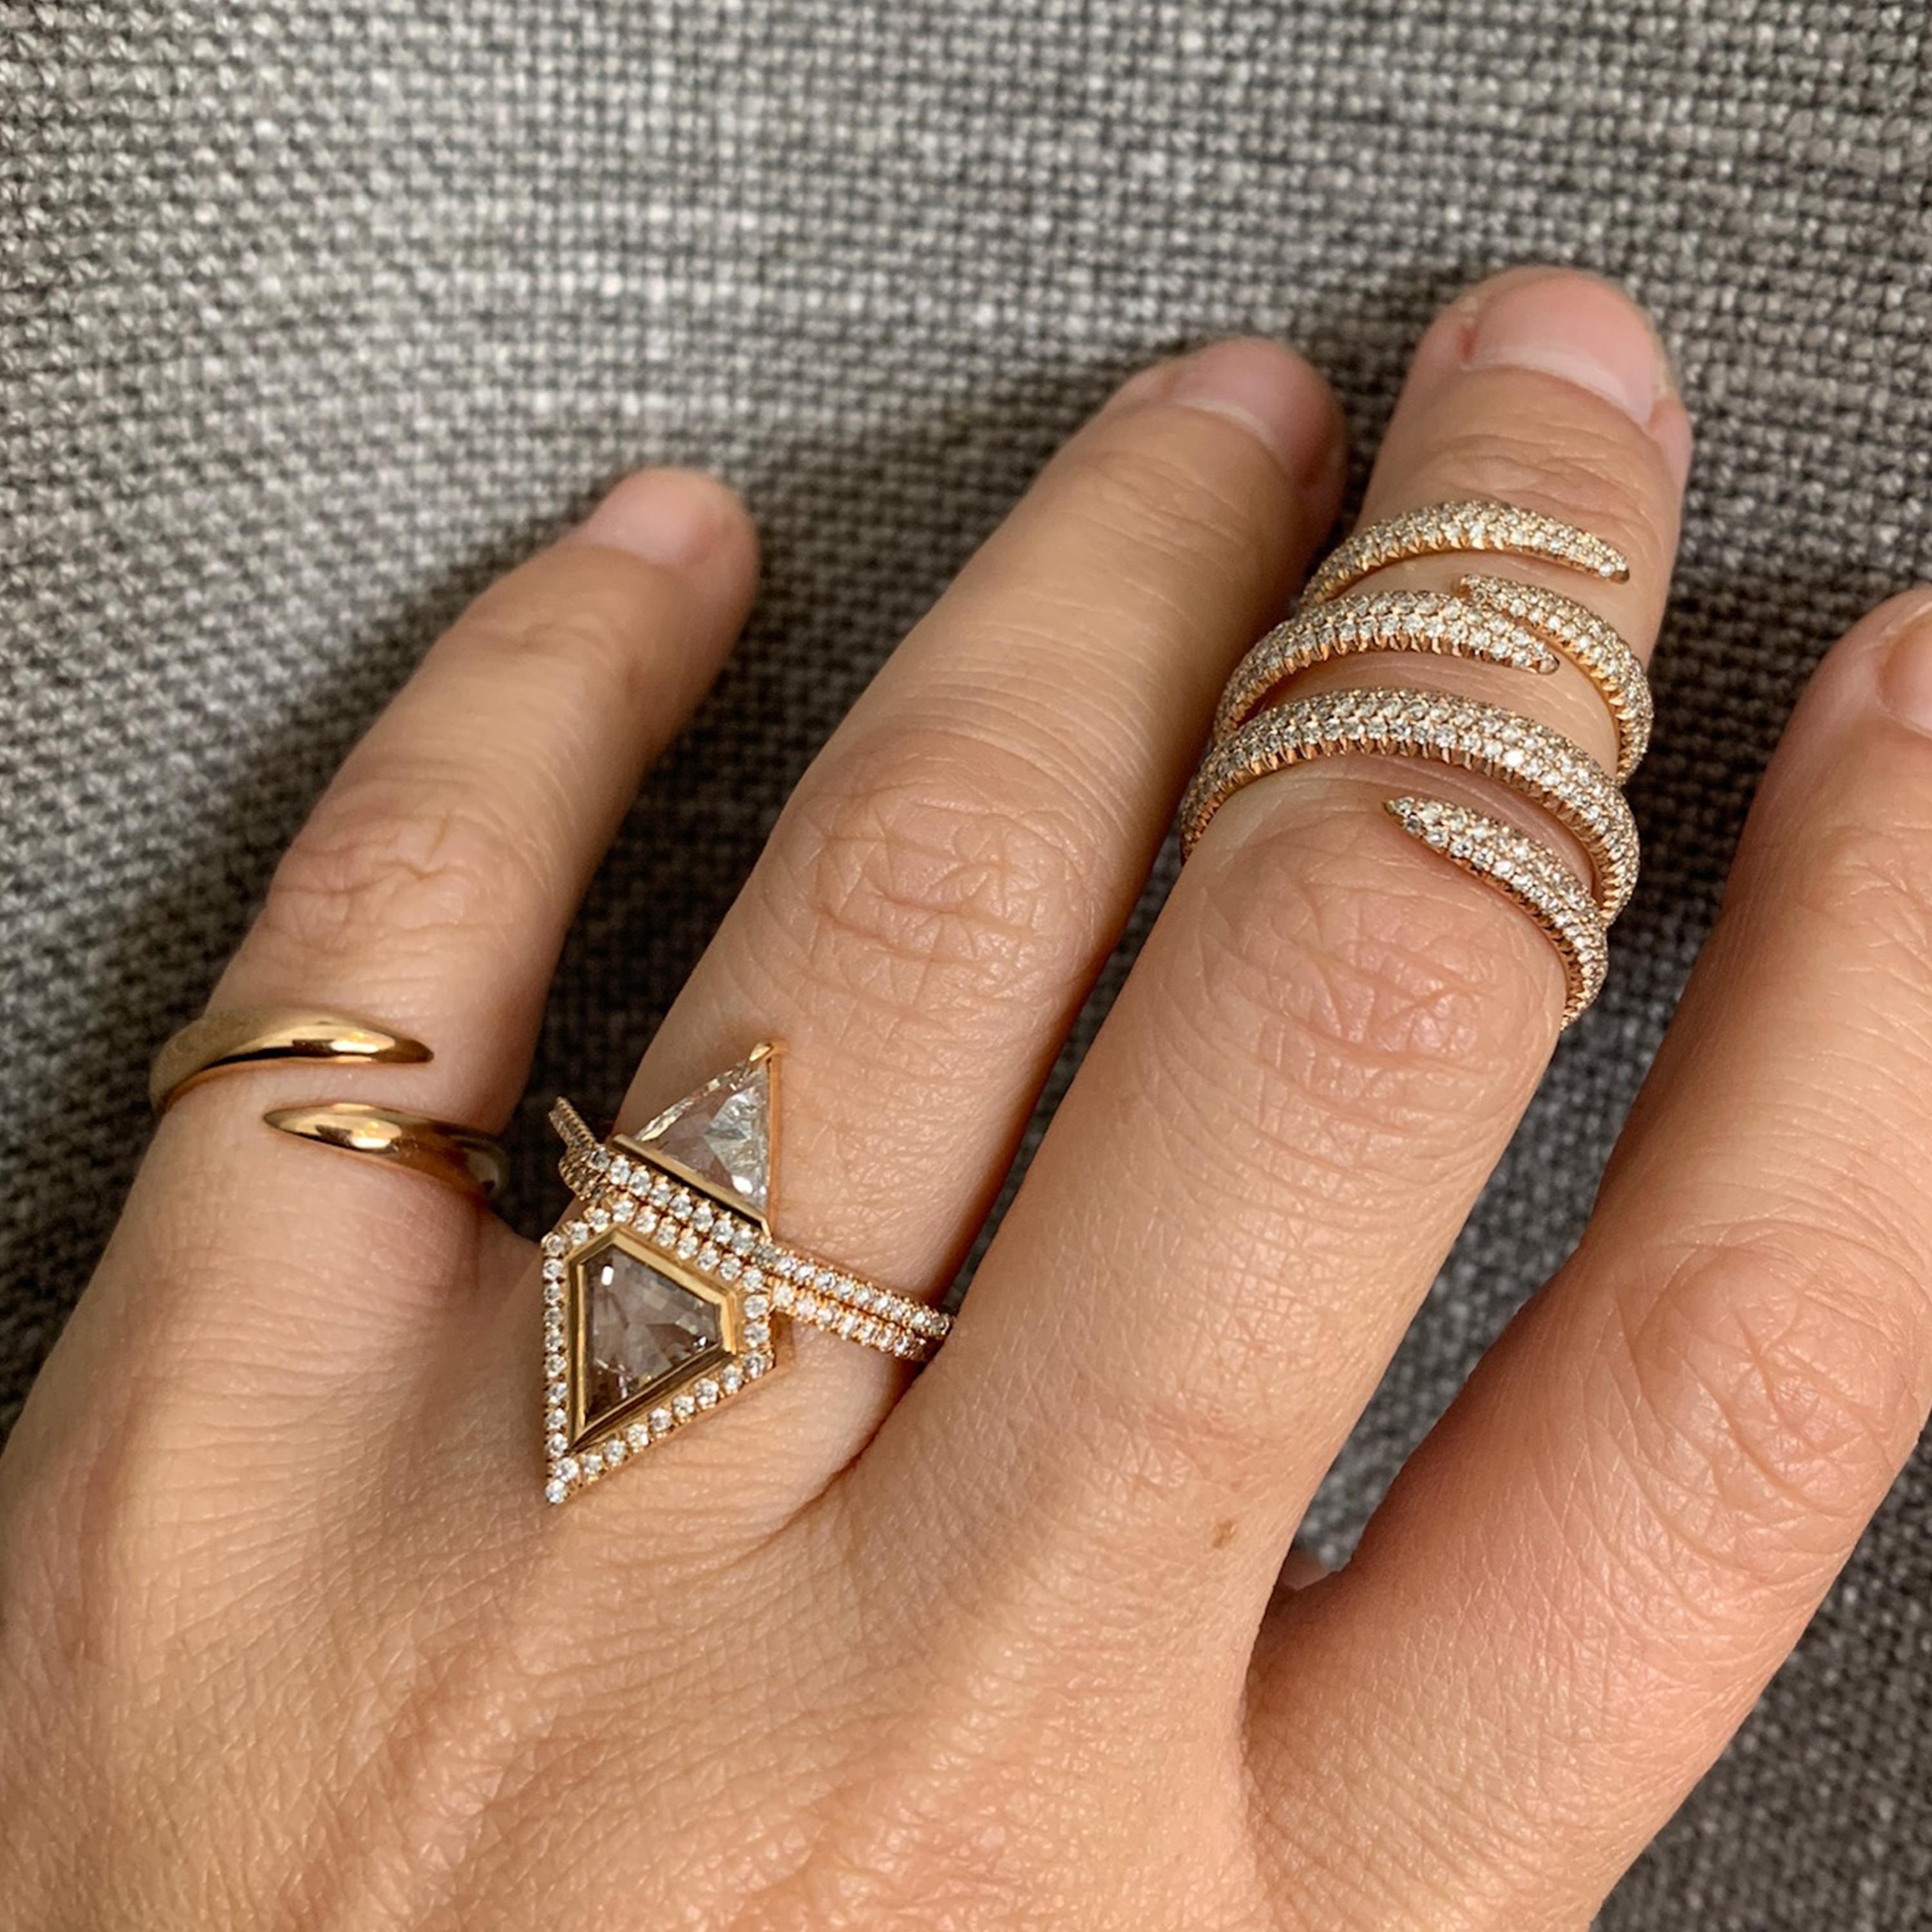 18K Yellow Gold - Size 3.5 

Additional sizes are available and this ring can be made to order in any size. This ring can be worn on any finger and is most commonly worn as a pinky or midi-ring. This style also comes in additional gold and diamond